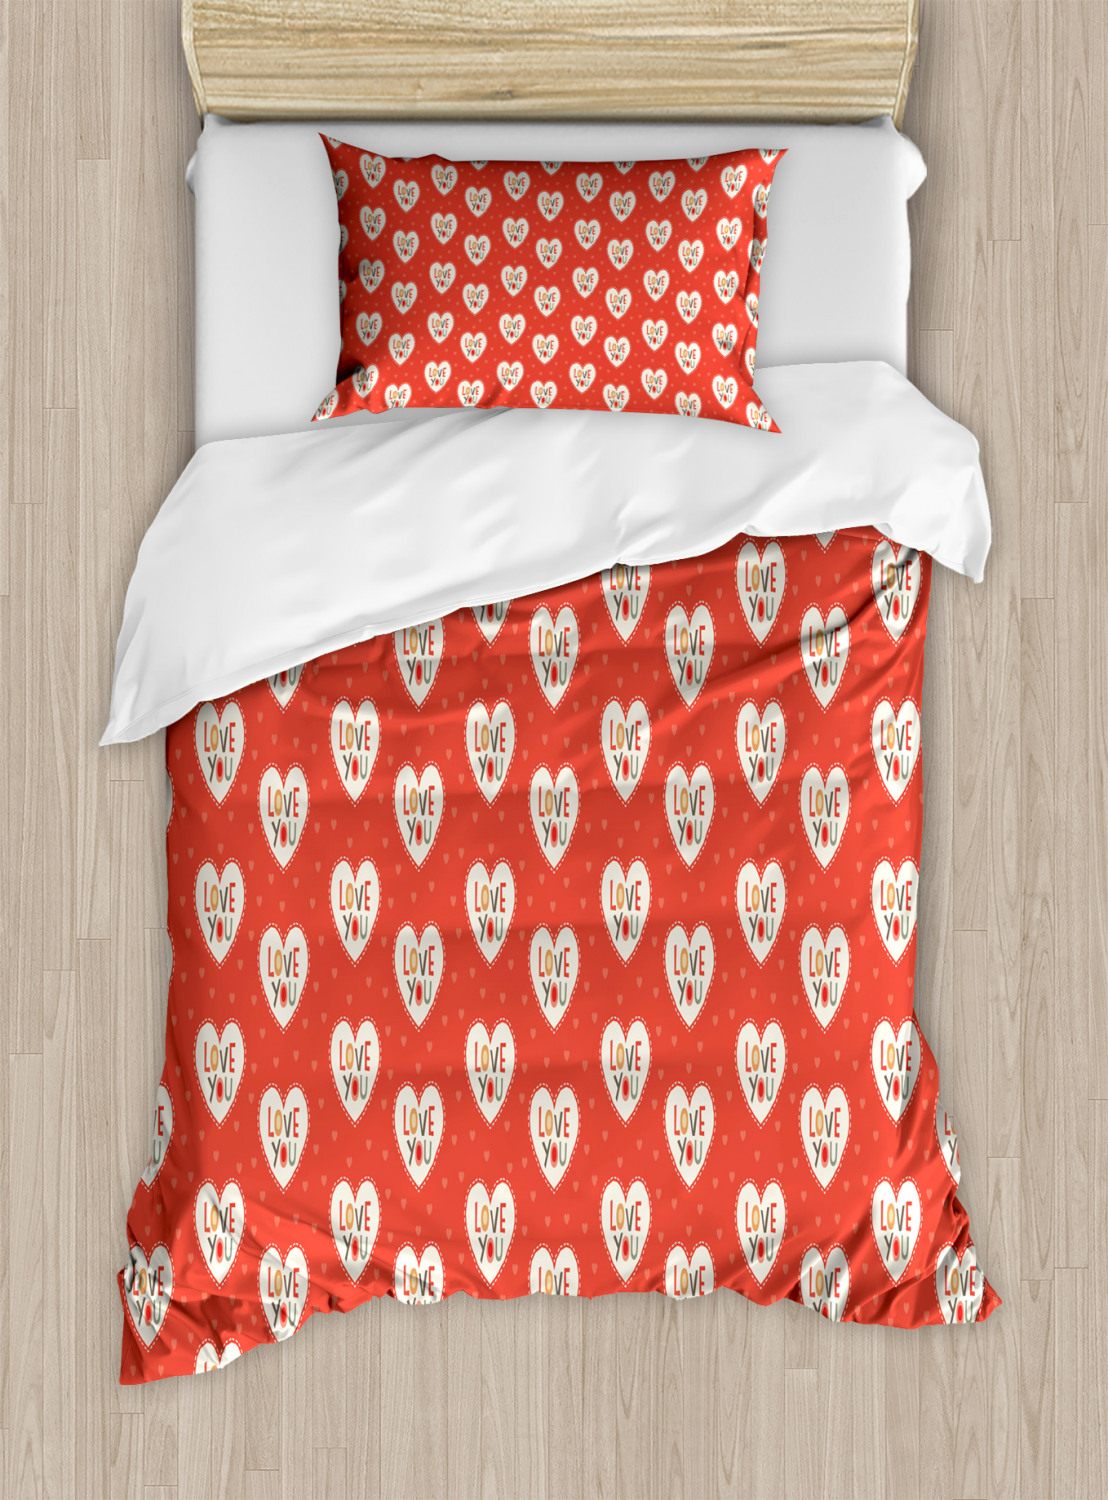 Love Duvet Cover Set With Pillow Shams Hipster Hearts Valentines